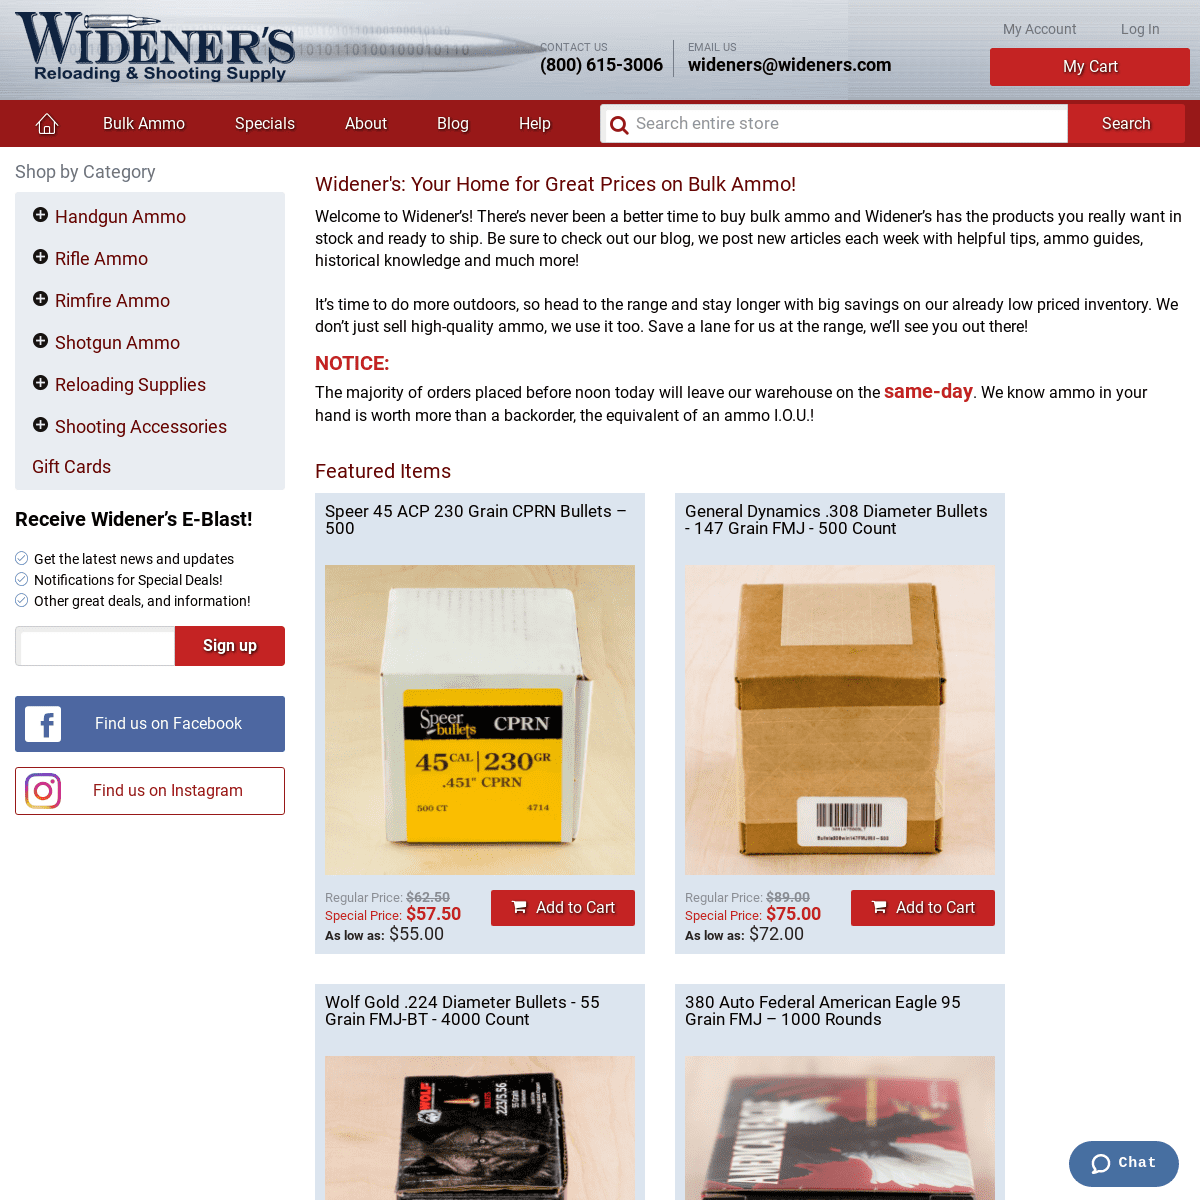 A complete backup of wideners.com